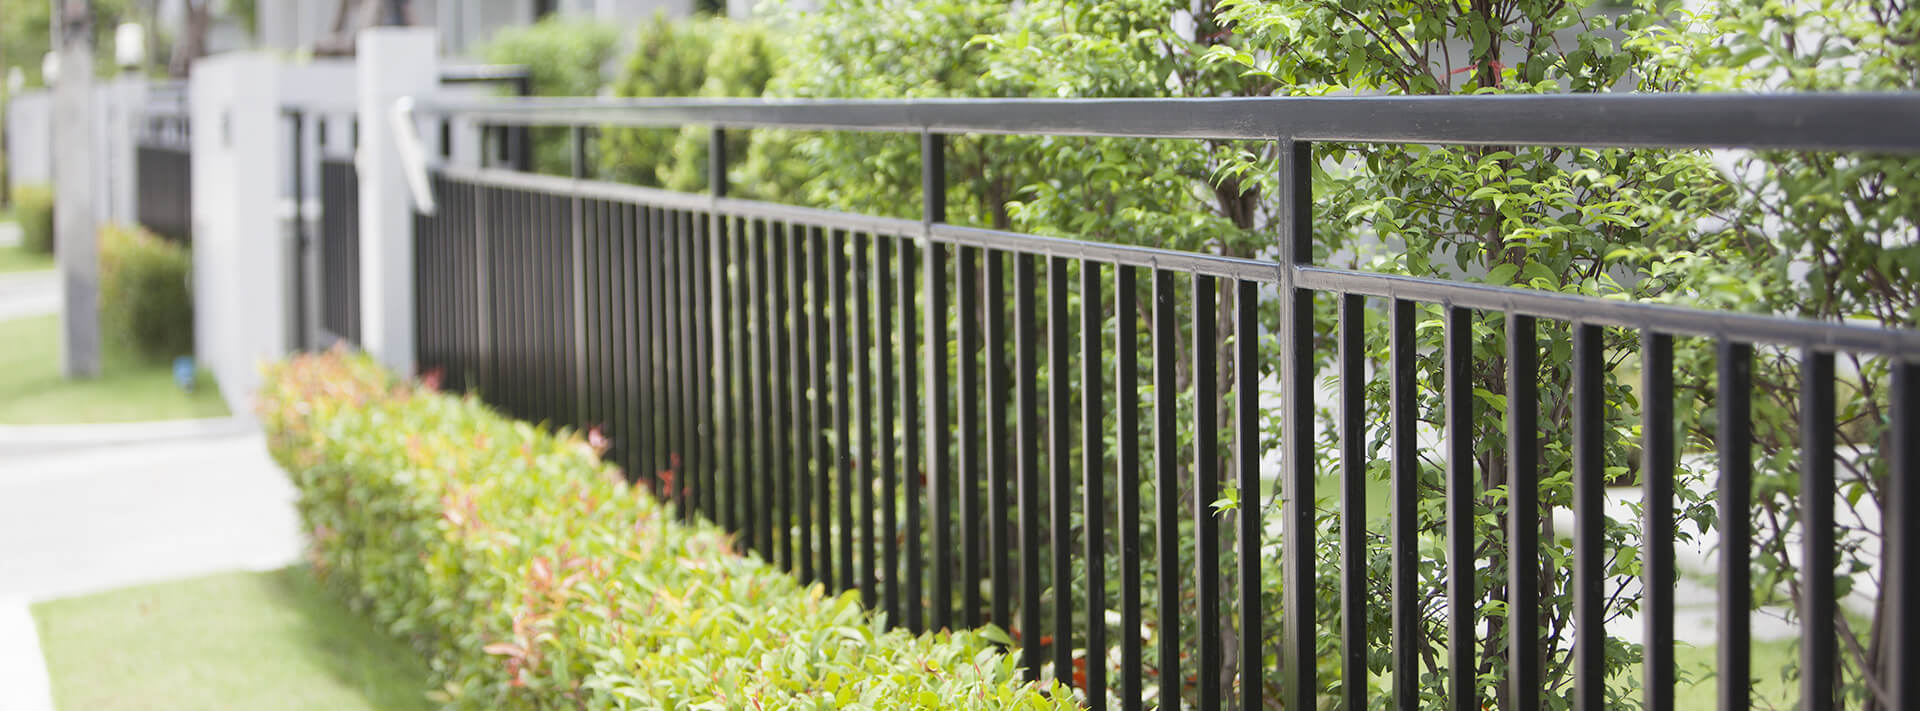 1 Rated Fence Company in West Virginia - Alco Fence Company